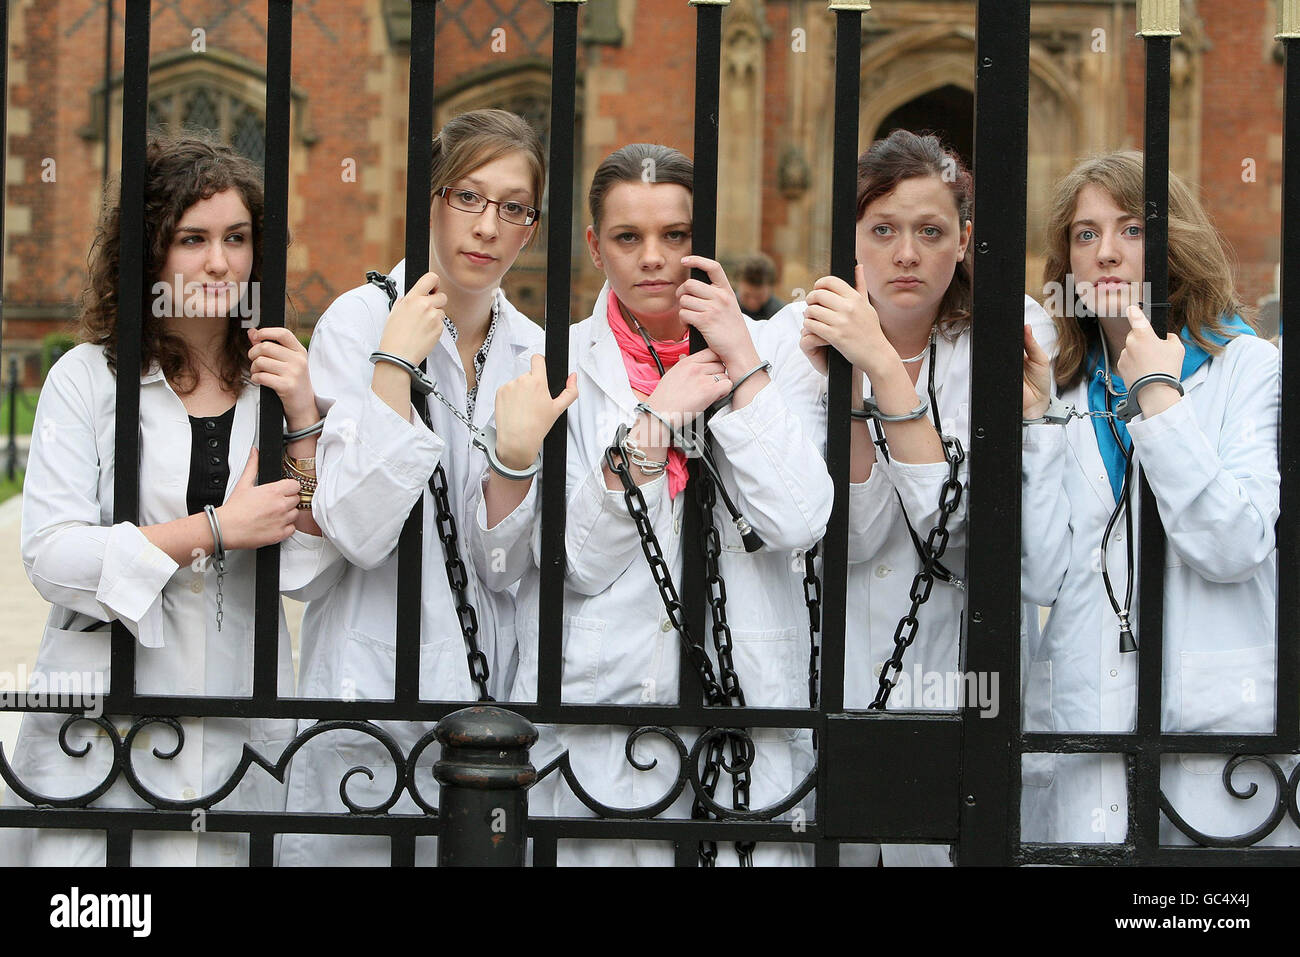 Individually handcuffed and chained together 24 Belfast students dressed as doctors protested at Queens University Belfast to highlight the plight of Dr Binayak Sen an award-winning paediatrician. Stock Photo